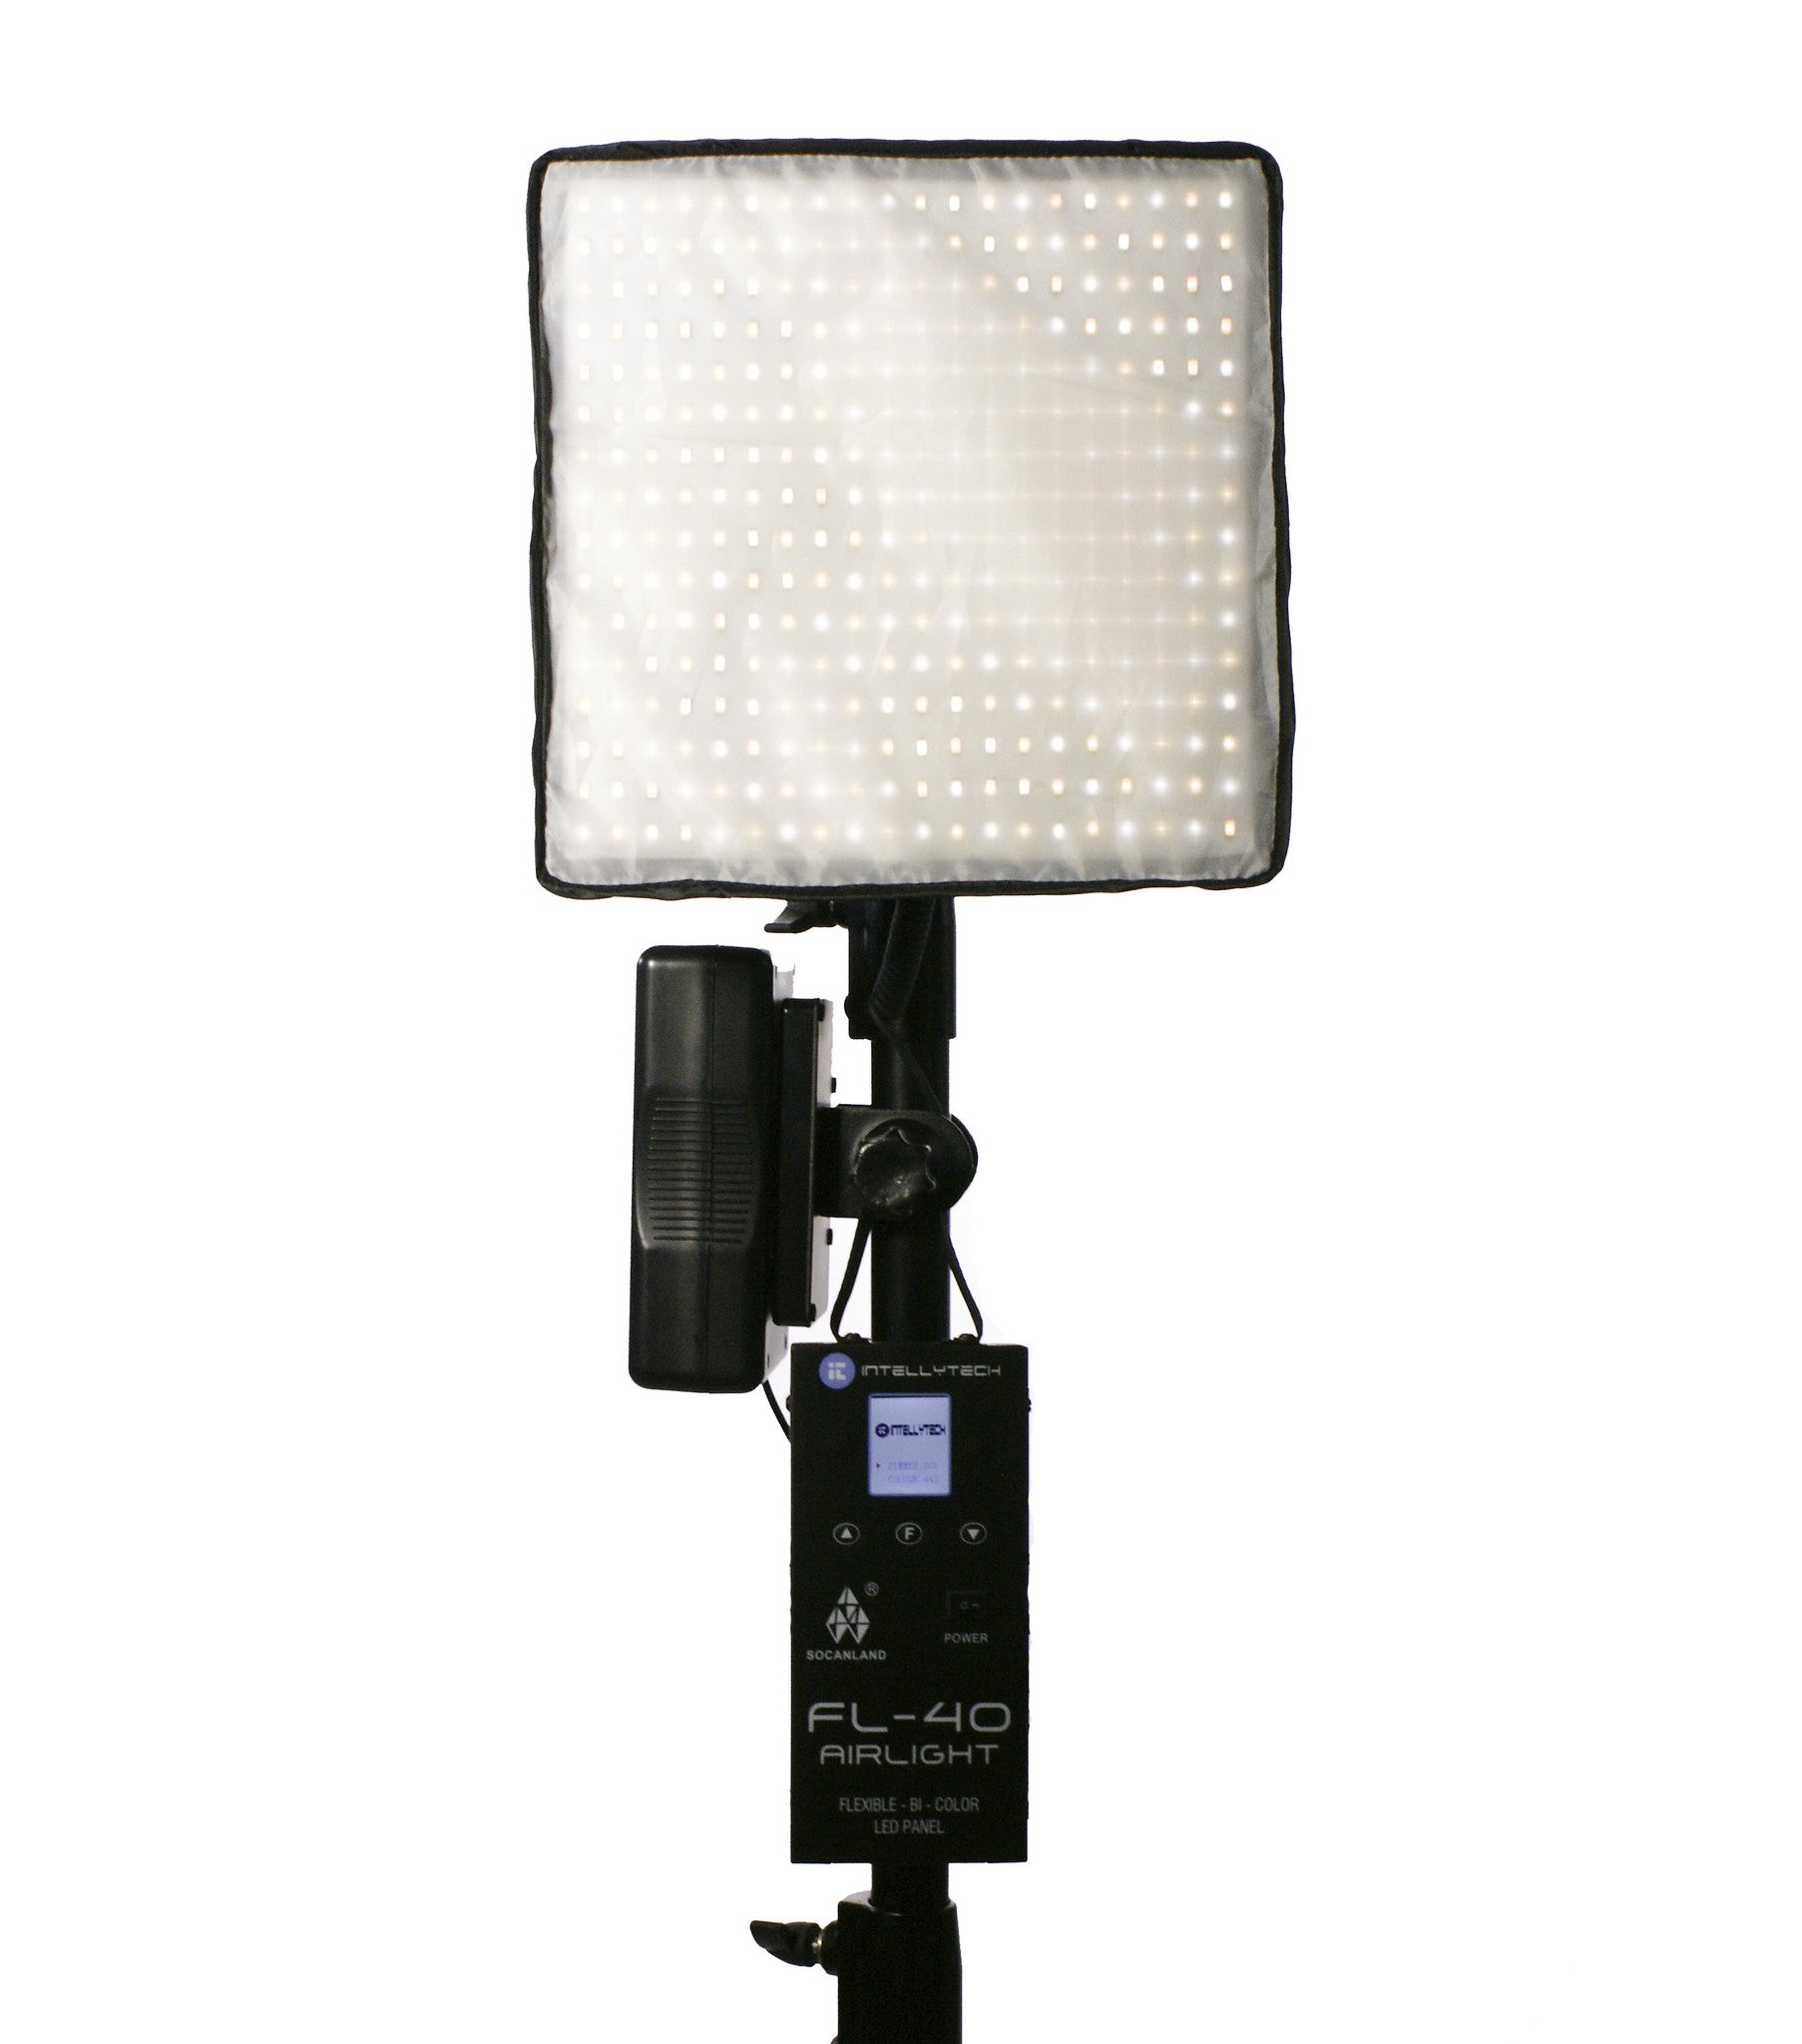 Reviewing Portable LED Lighting Solutions -- Flexible Panels and Light Stix for Video & Photgraphy